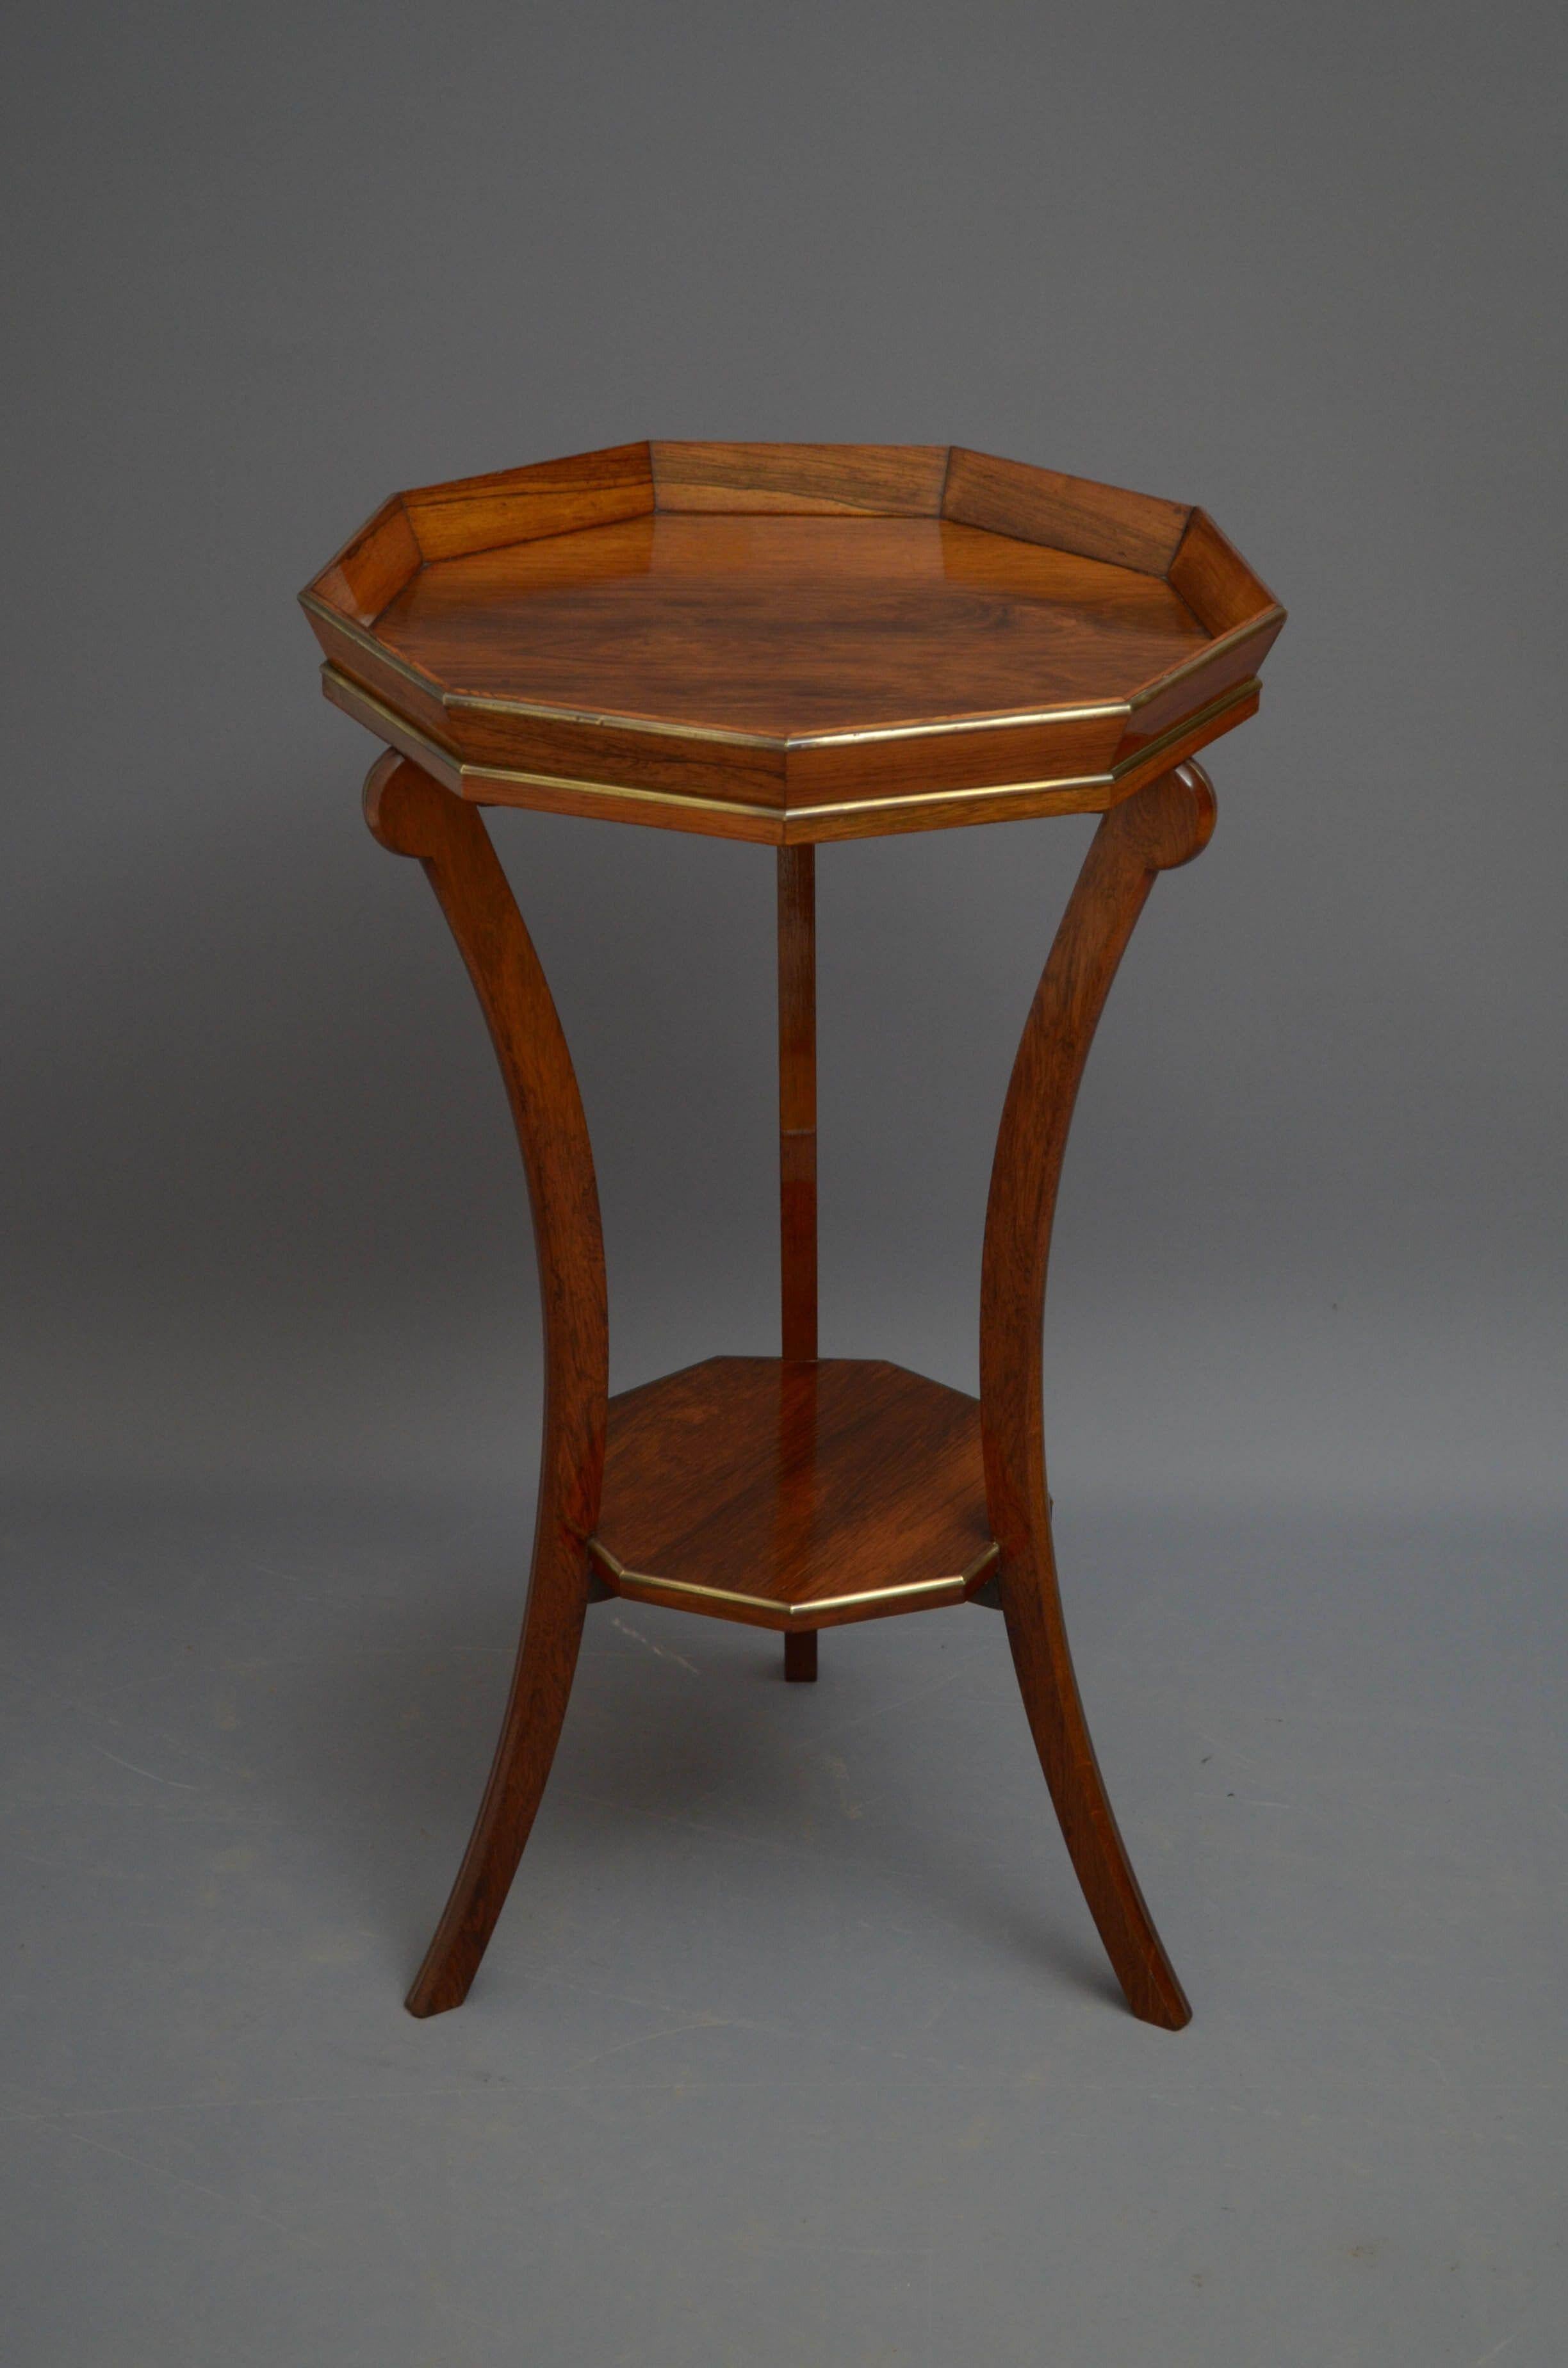 Sn5249 fine quality Regency plant stand or a lamp table with octagonal top with raised gallery on three shaped supports united by undertier, all decorated with brass inlay. This antique table retains its original finish which has been revived and